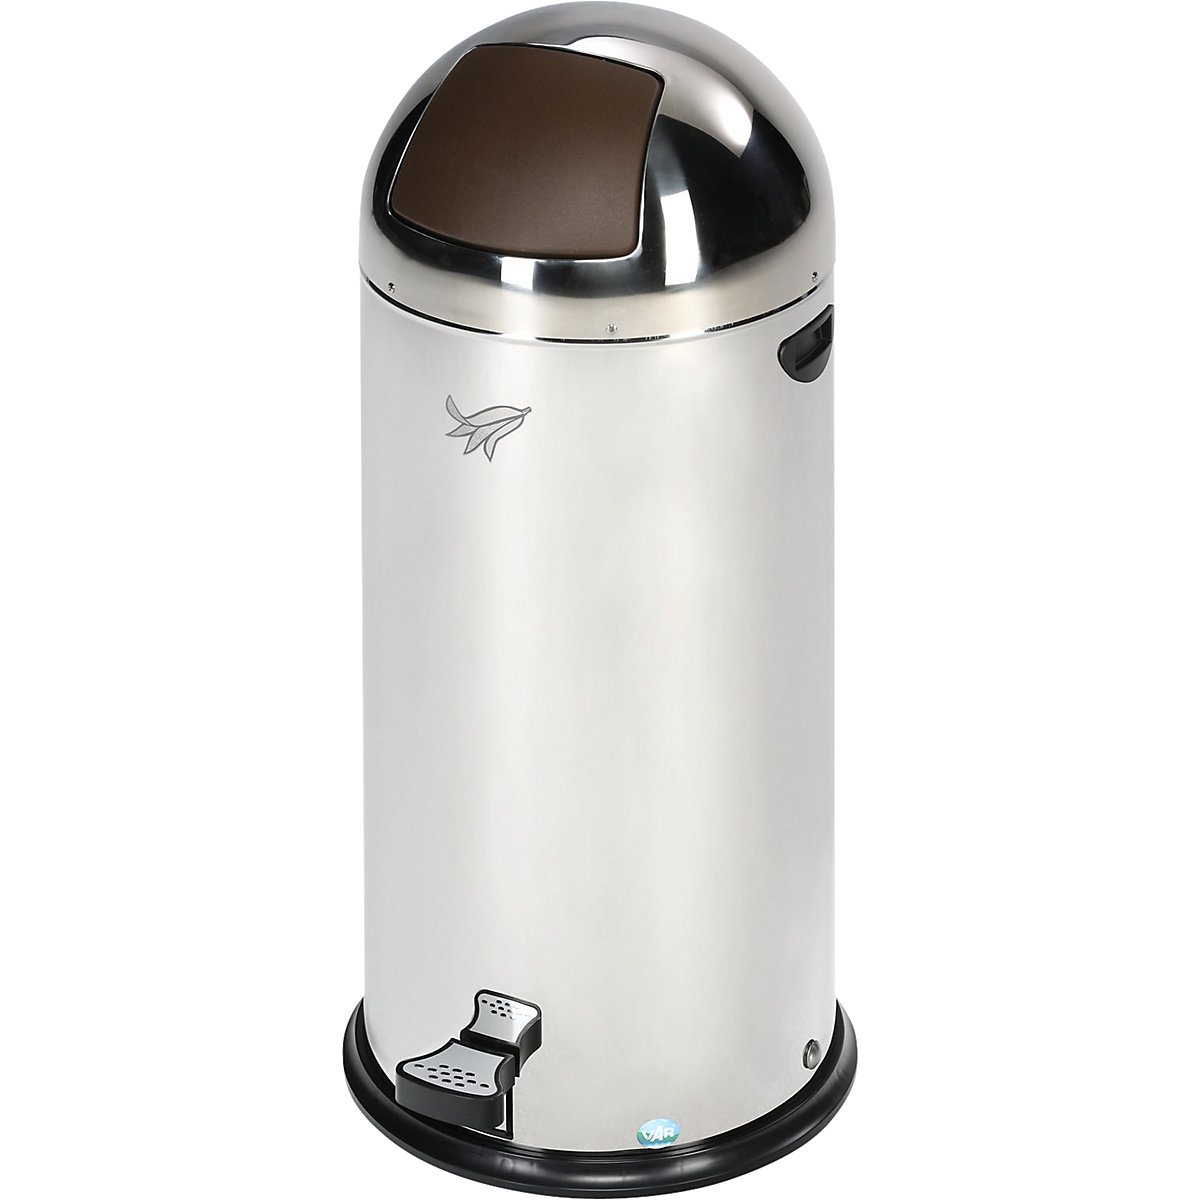 Push waste bin with pedal - VAR